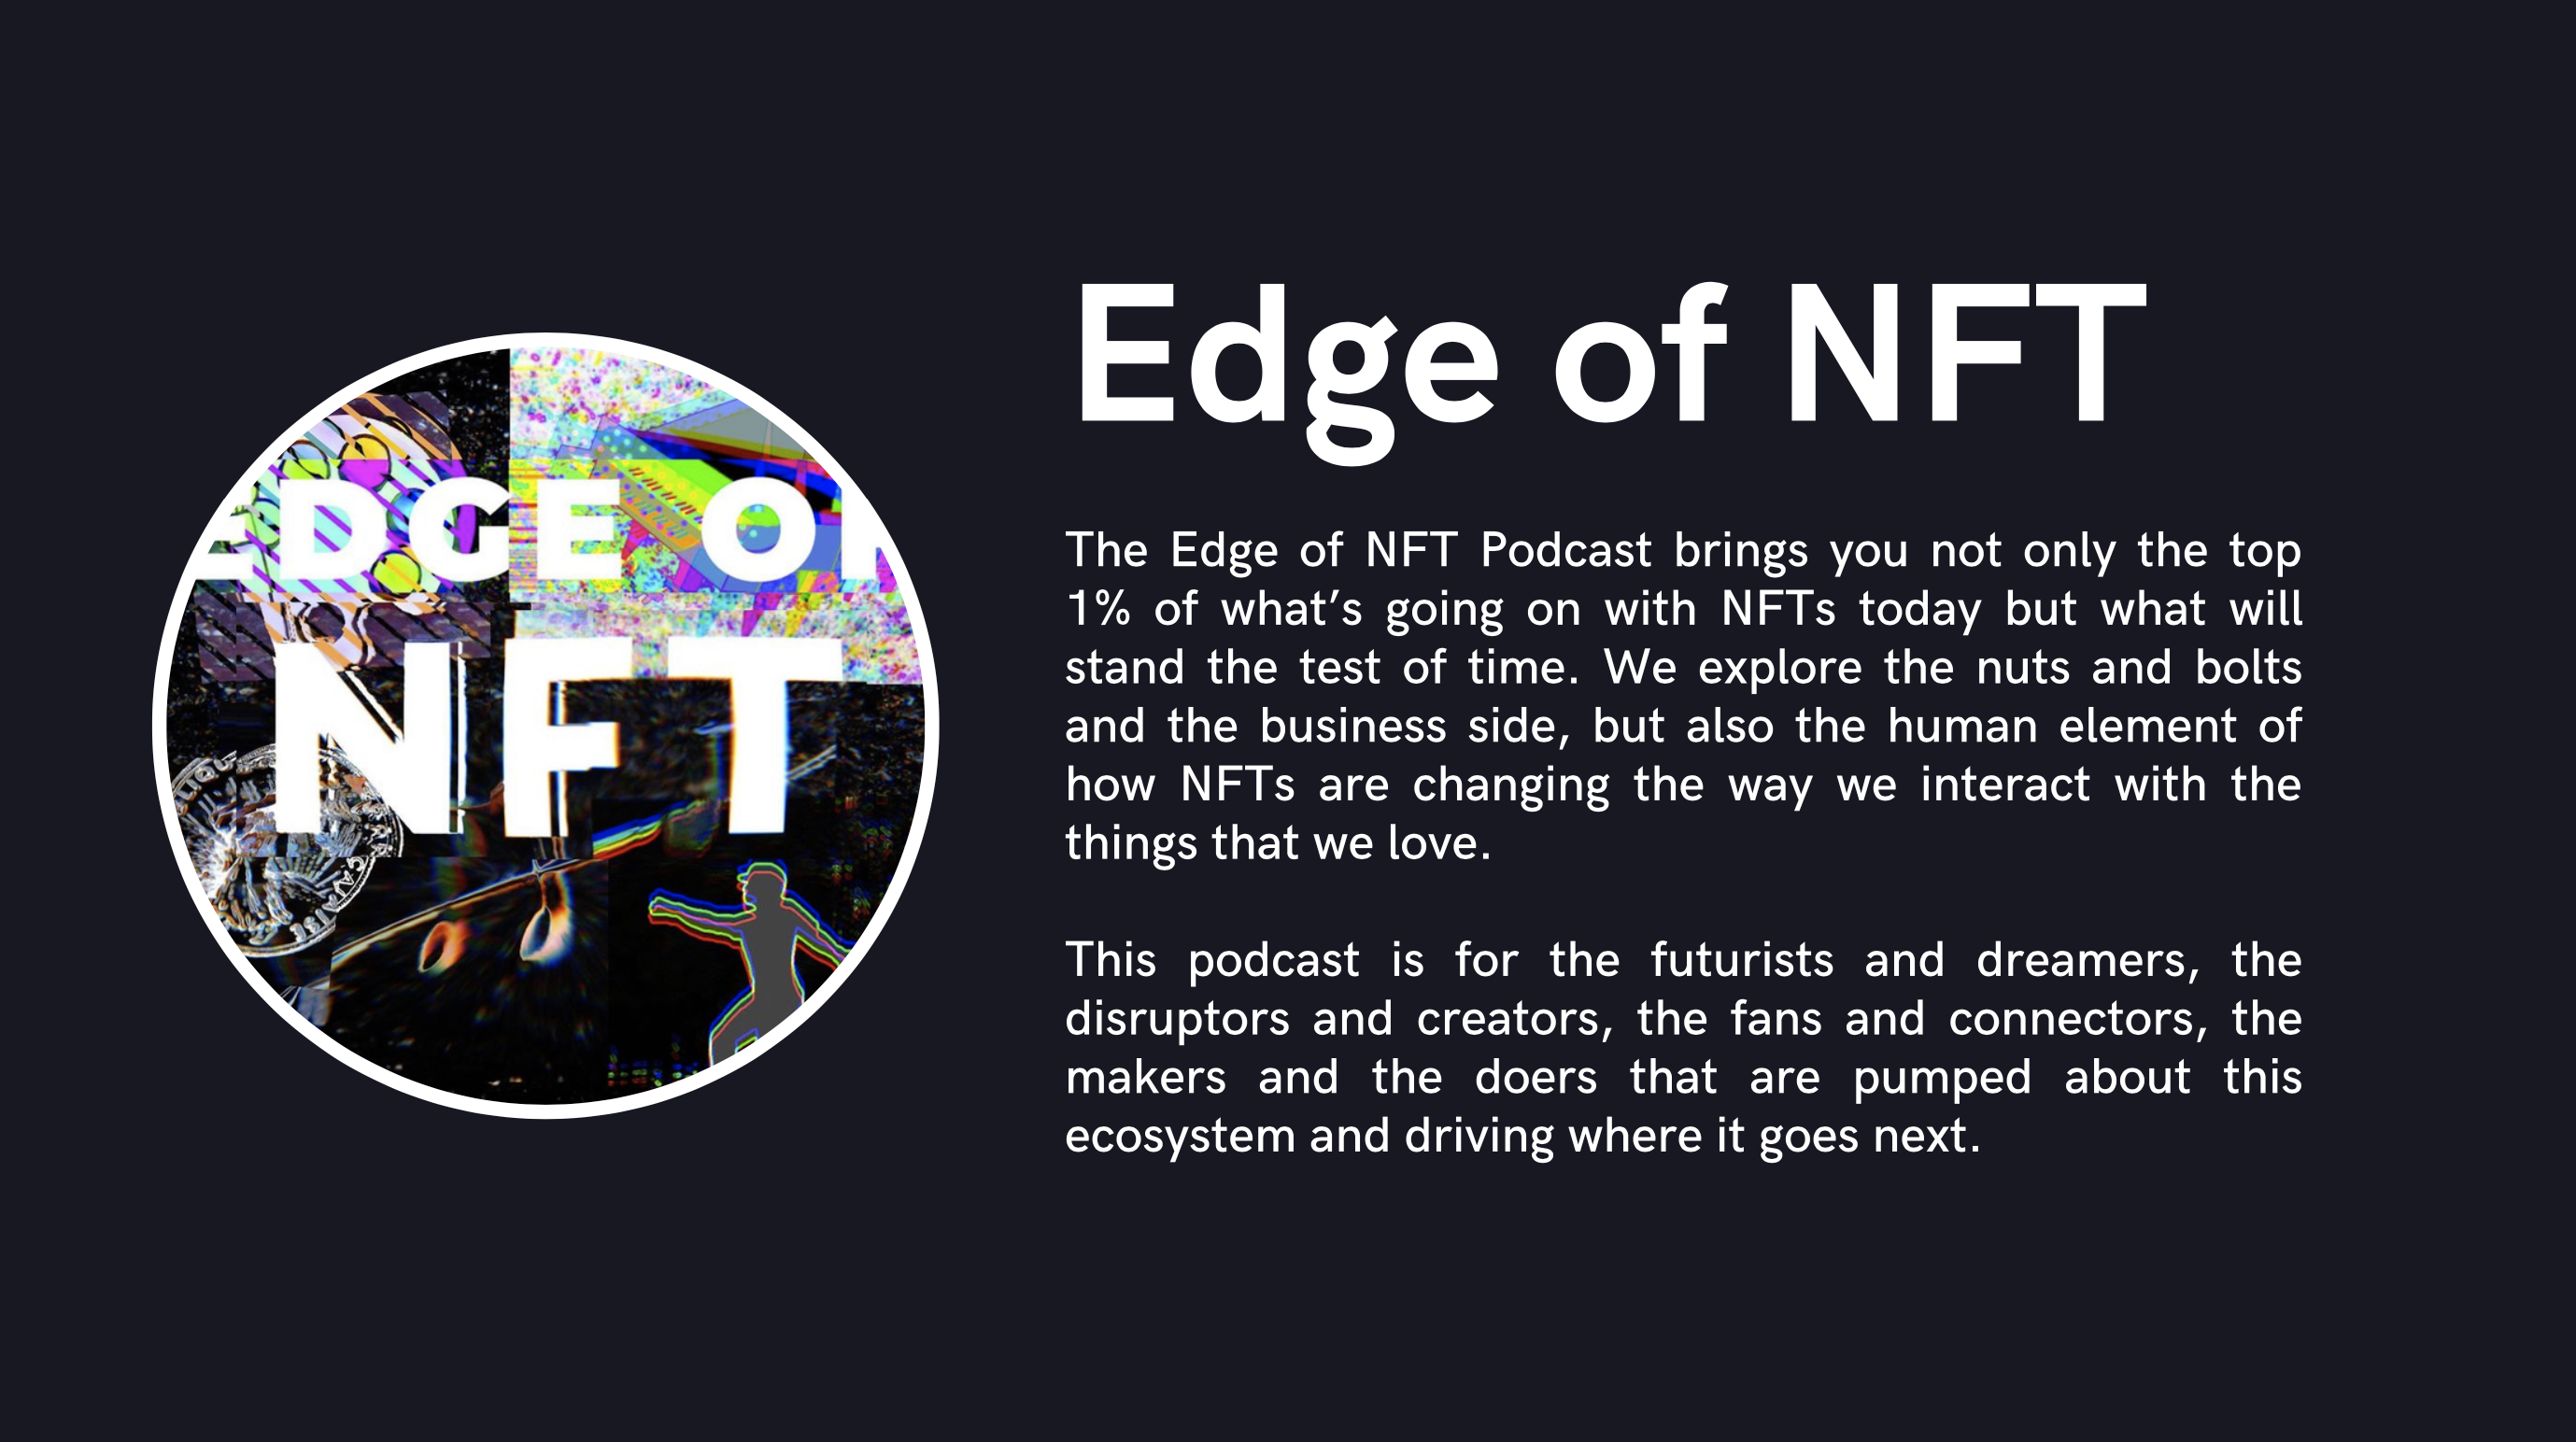 Edge of NFT LLC, Wednesday, June 9, 2021, Press release picture